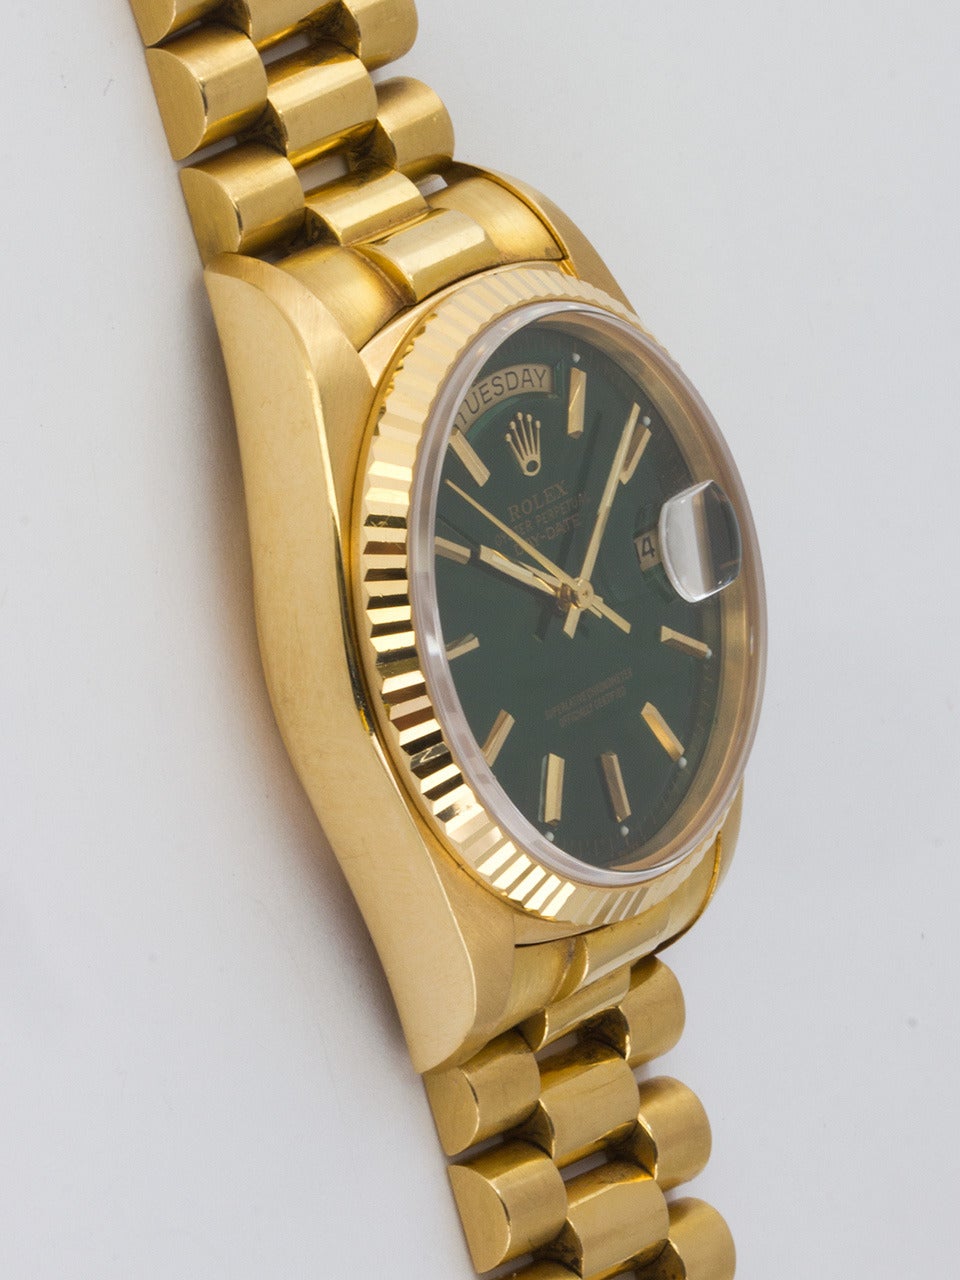 Rolex 18K Yellow Gold Day Date President Wristwatch ref 18038 serial # 5.2 million circa 1978. Super sharp condition example 36mm diameter Oyster case with heavy beefy lugs and fluted bezel. Very pleasing custom colored 